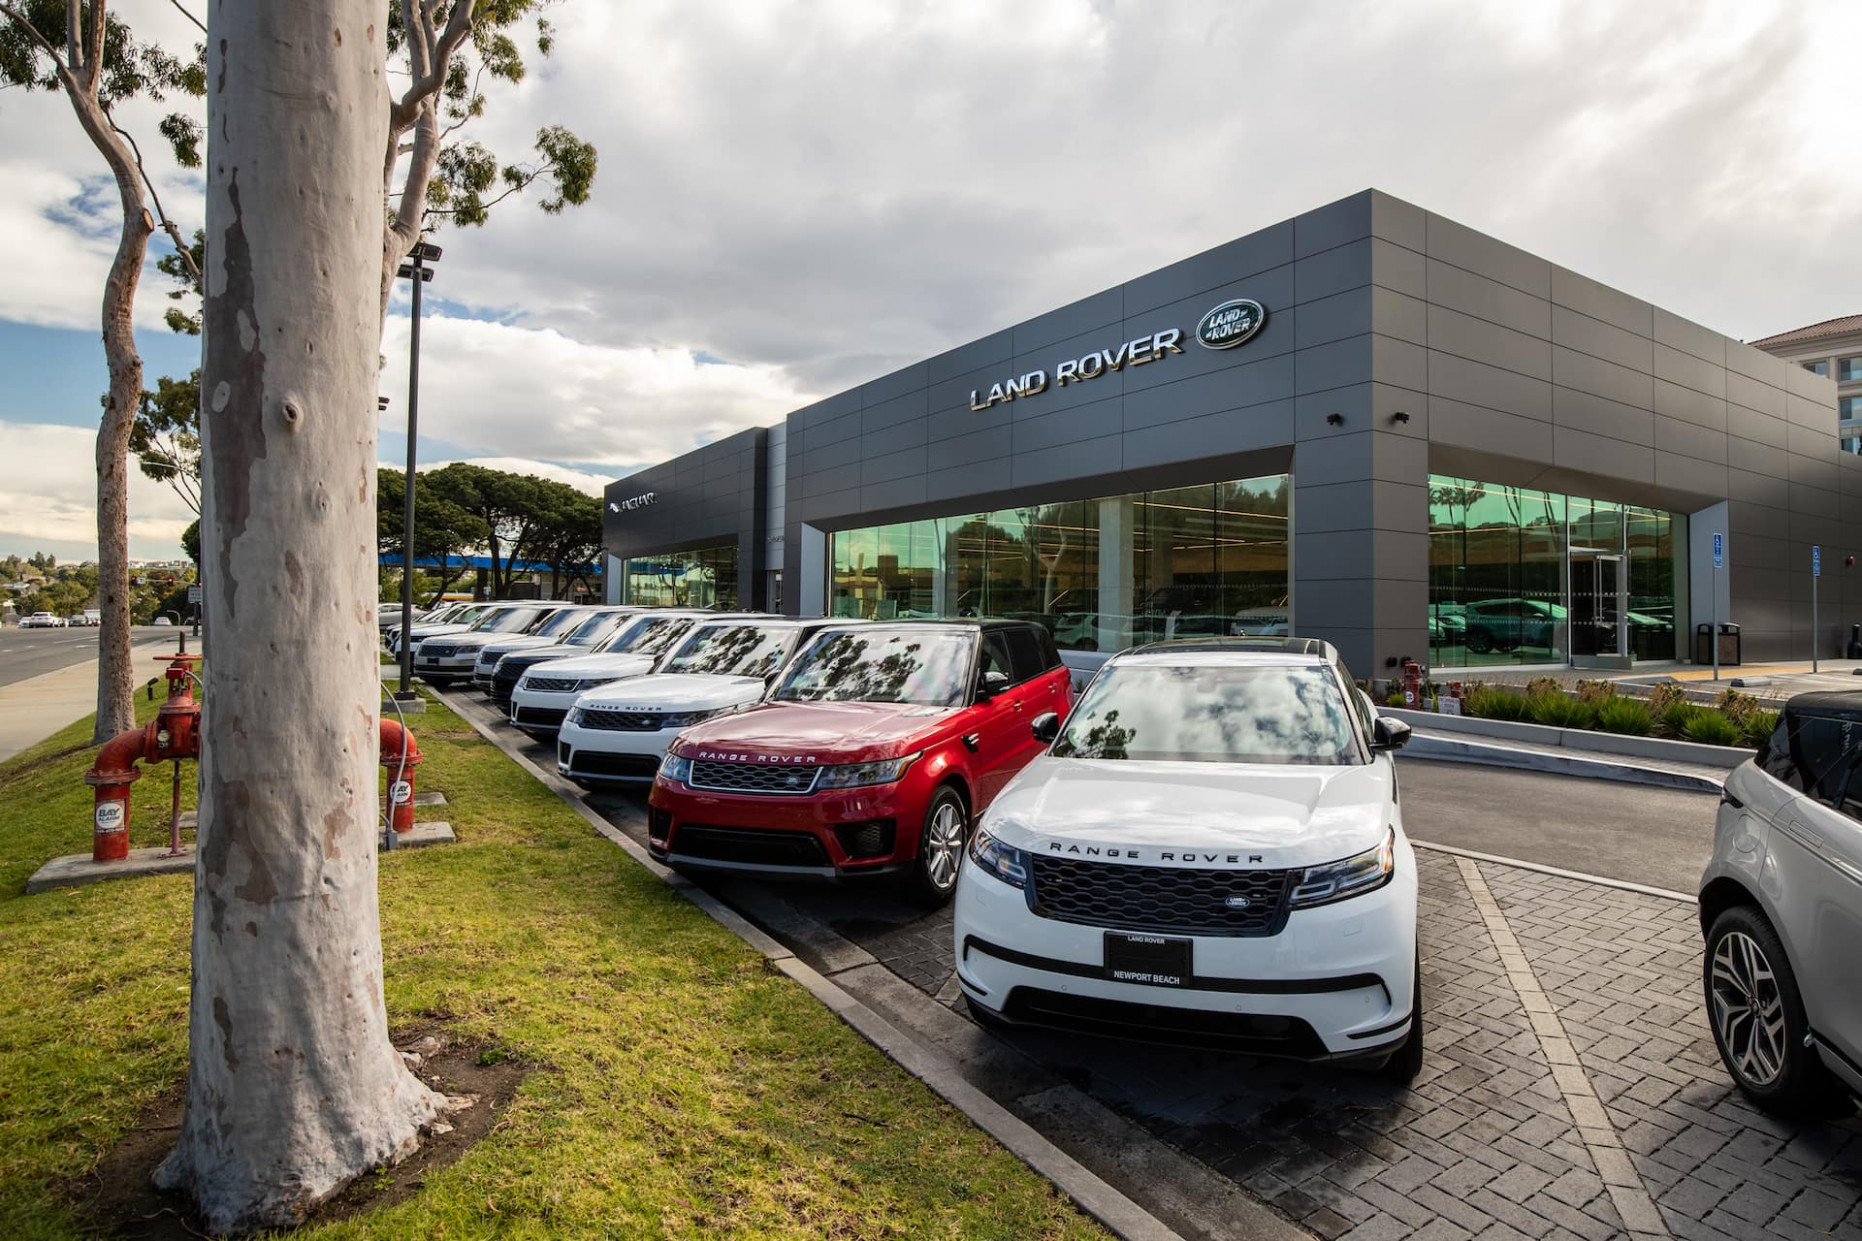 Land Rover and Used Car Dealer Newport Beach  Land Rover Newport  - newport beach land rover